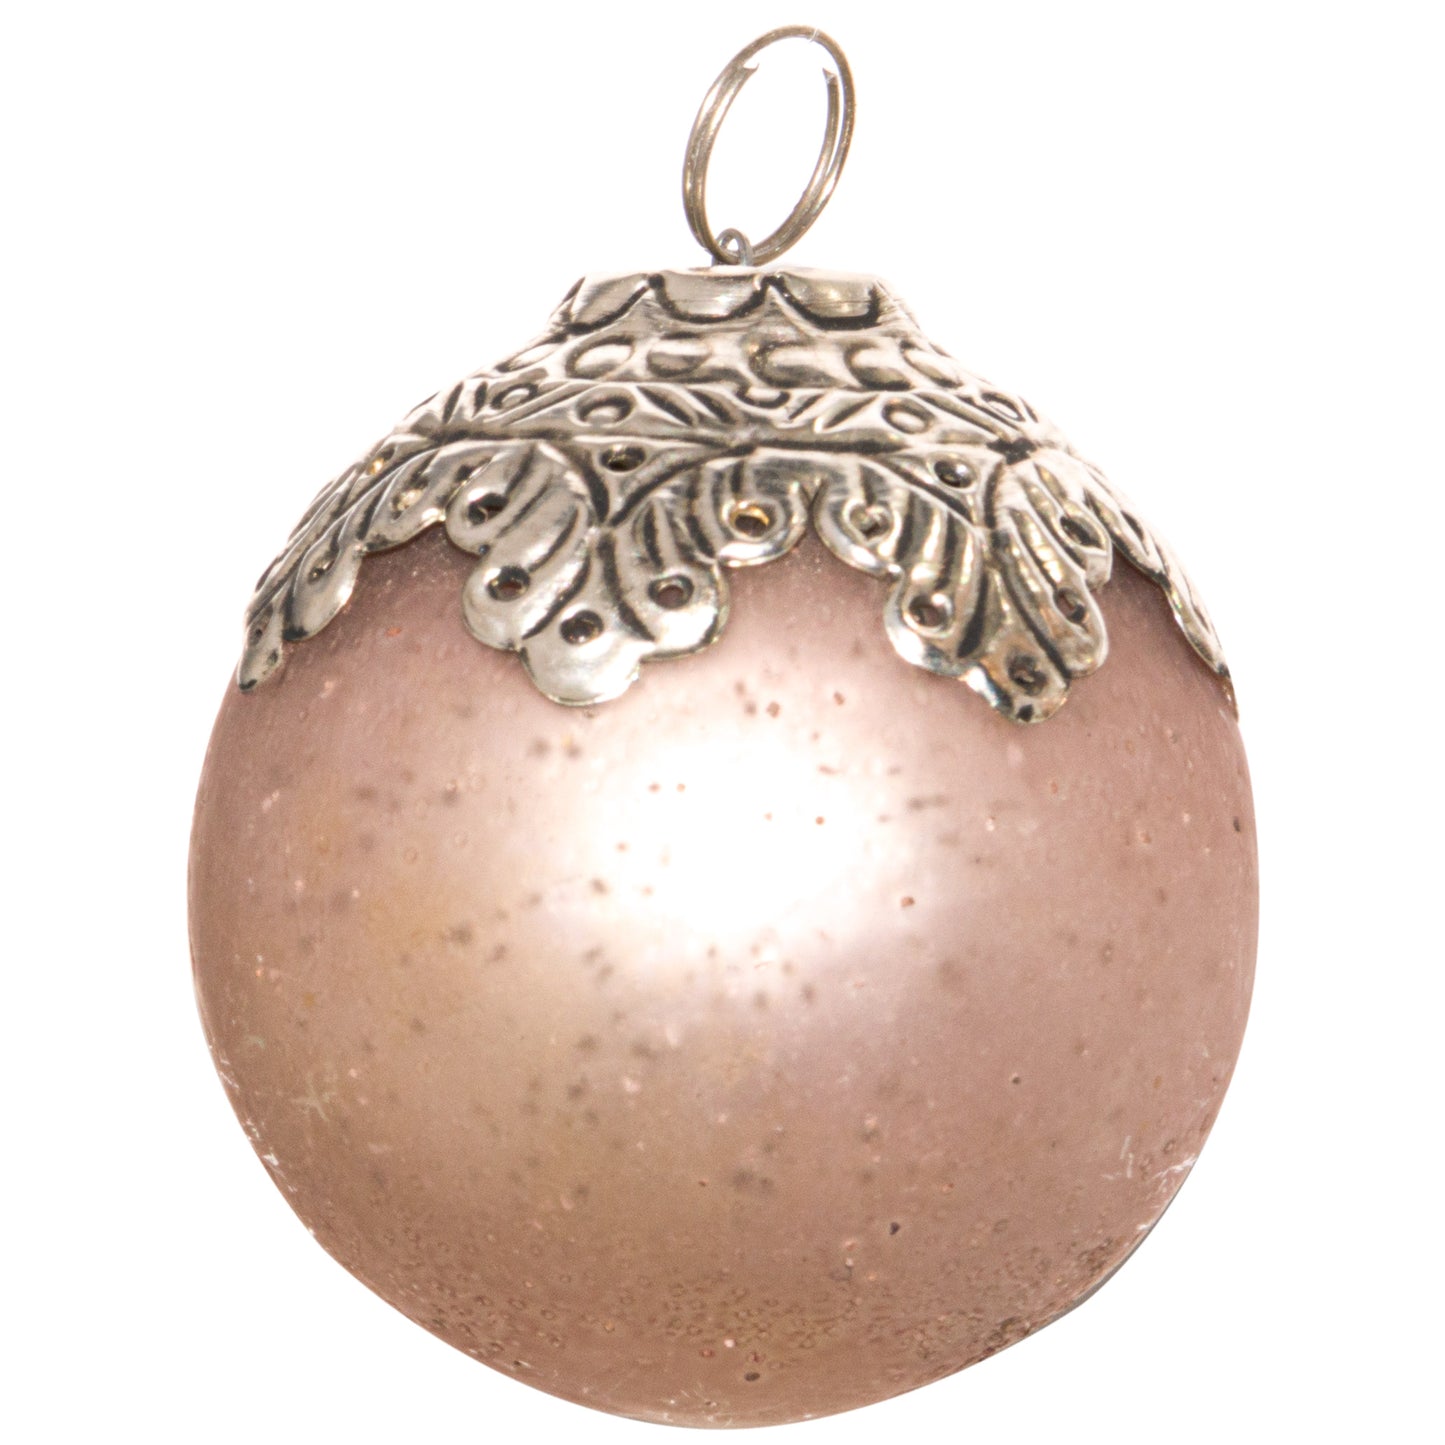 The Noel Collection Venus Crested Small Bauble